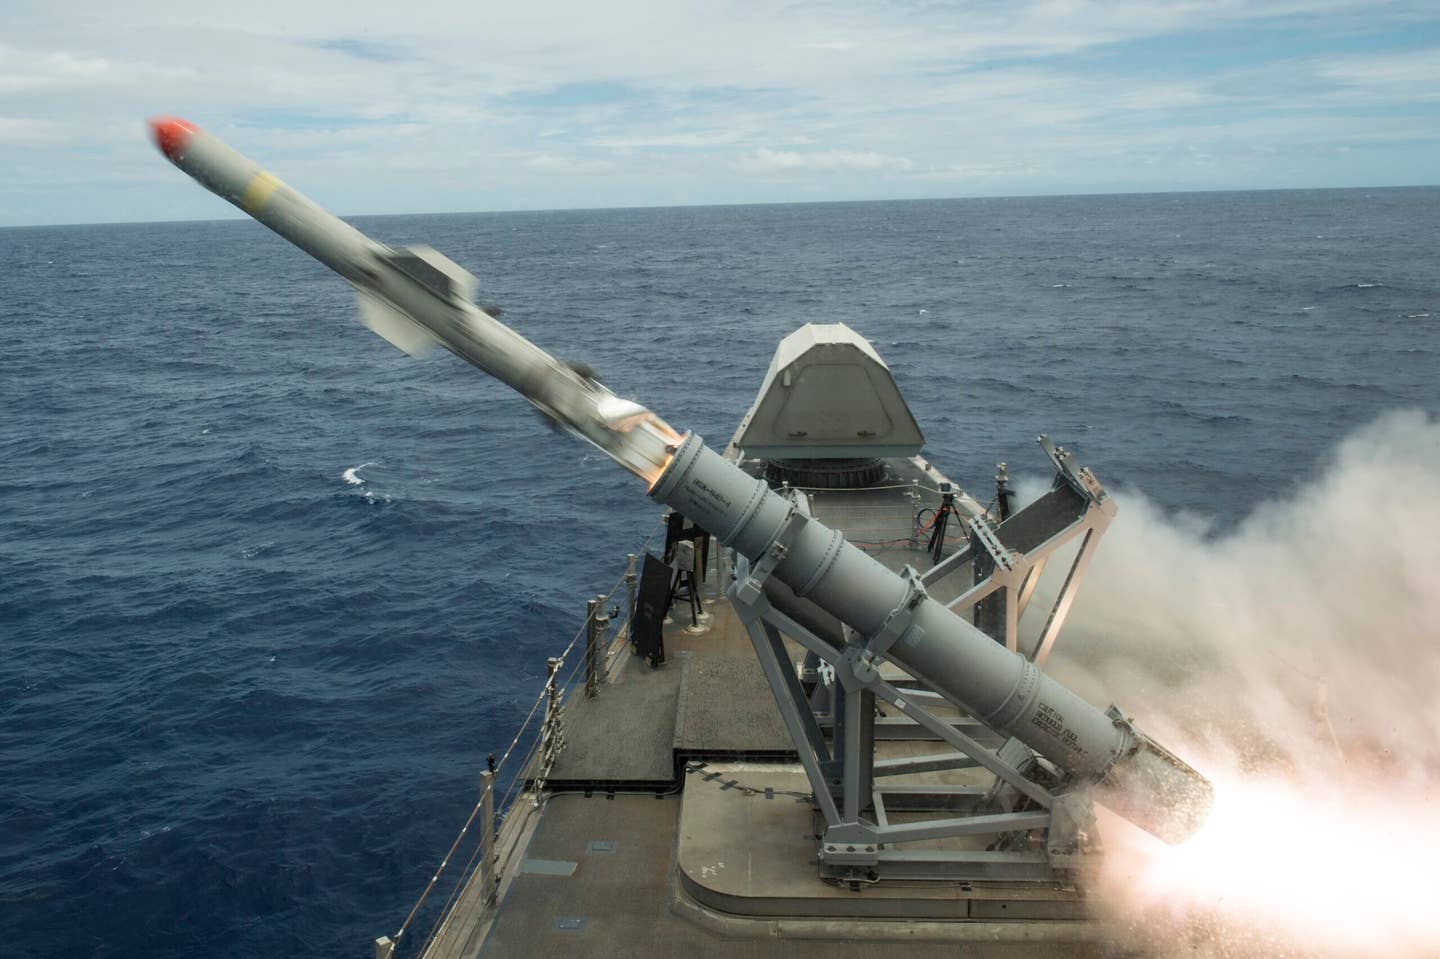 A Harpoon Block 1C anti-ship missile is launched from the USS <em>Coronado</em> (LCS-4), an <em>Independence</em> variant Littoral Combat Ship, on July 19, 2016. <em>U.S. Navy photo by Mass Communication Specialist 2nd Class Michaela Garrison/Released</em>